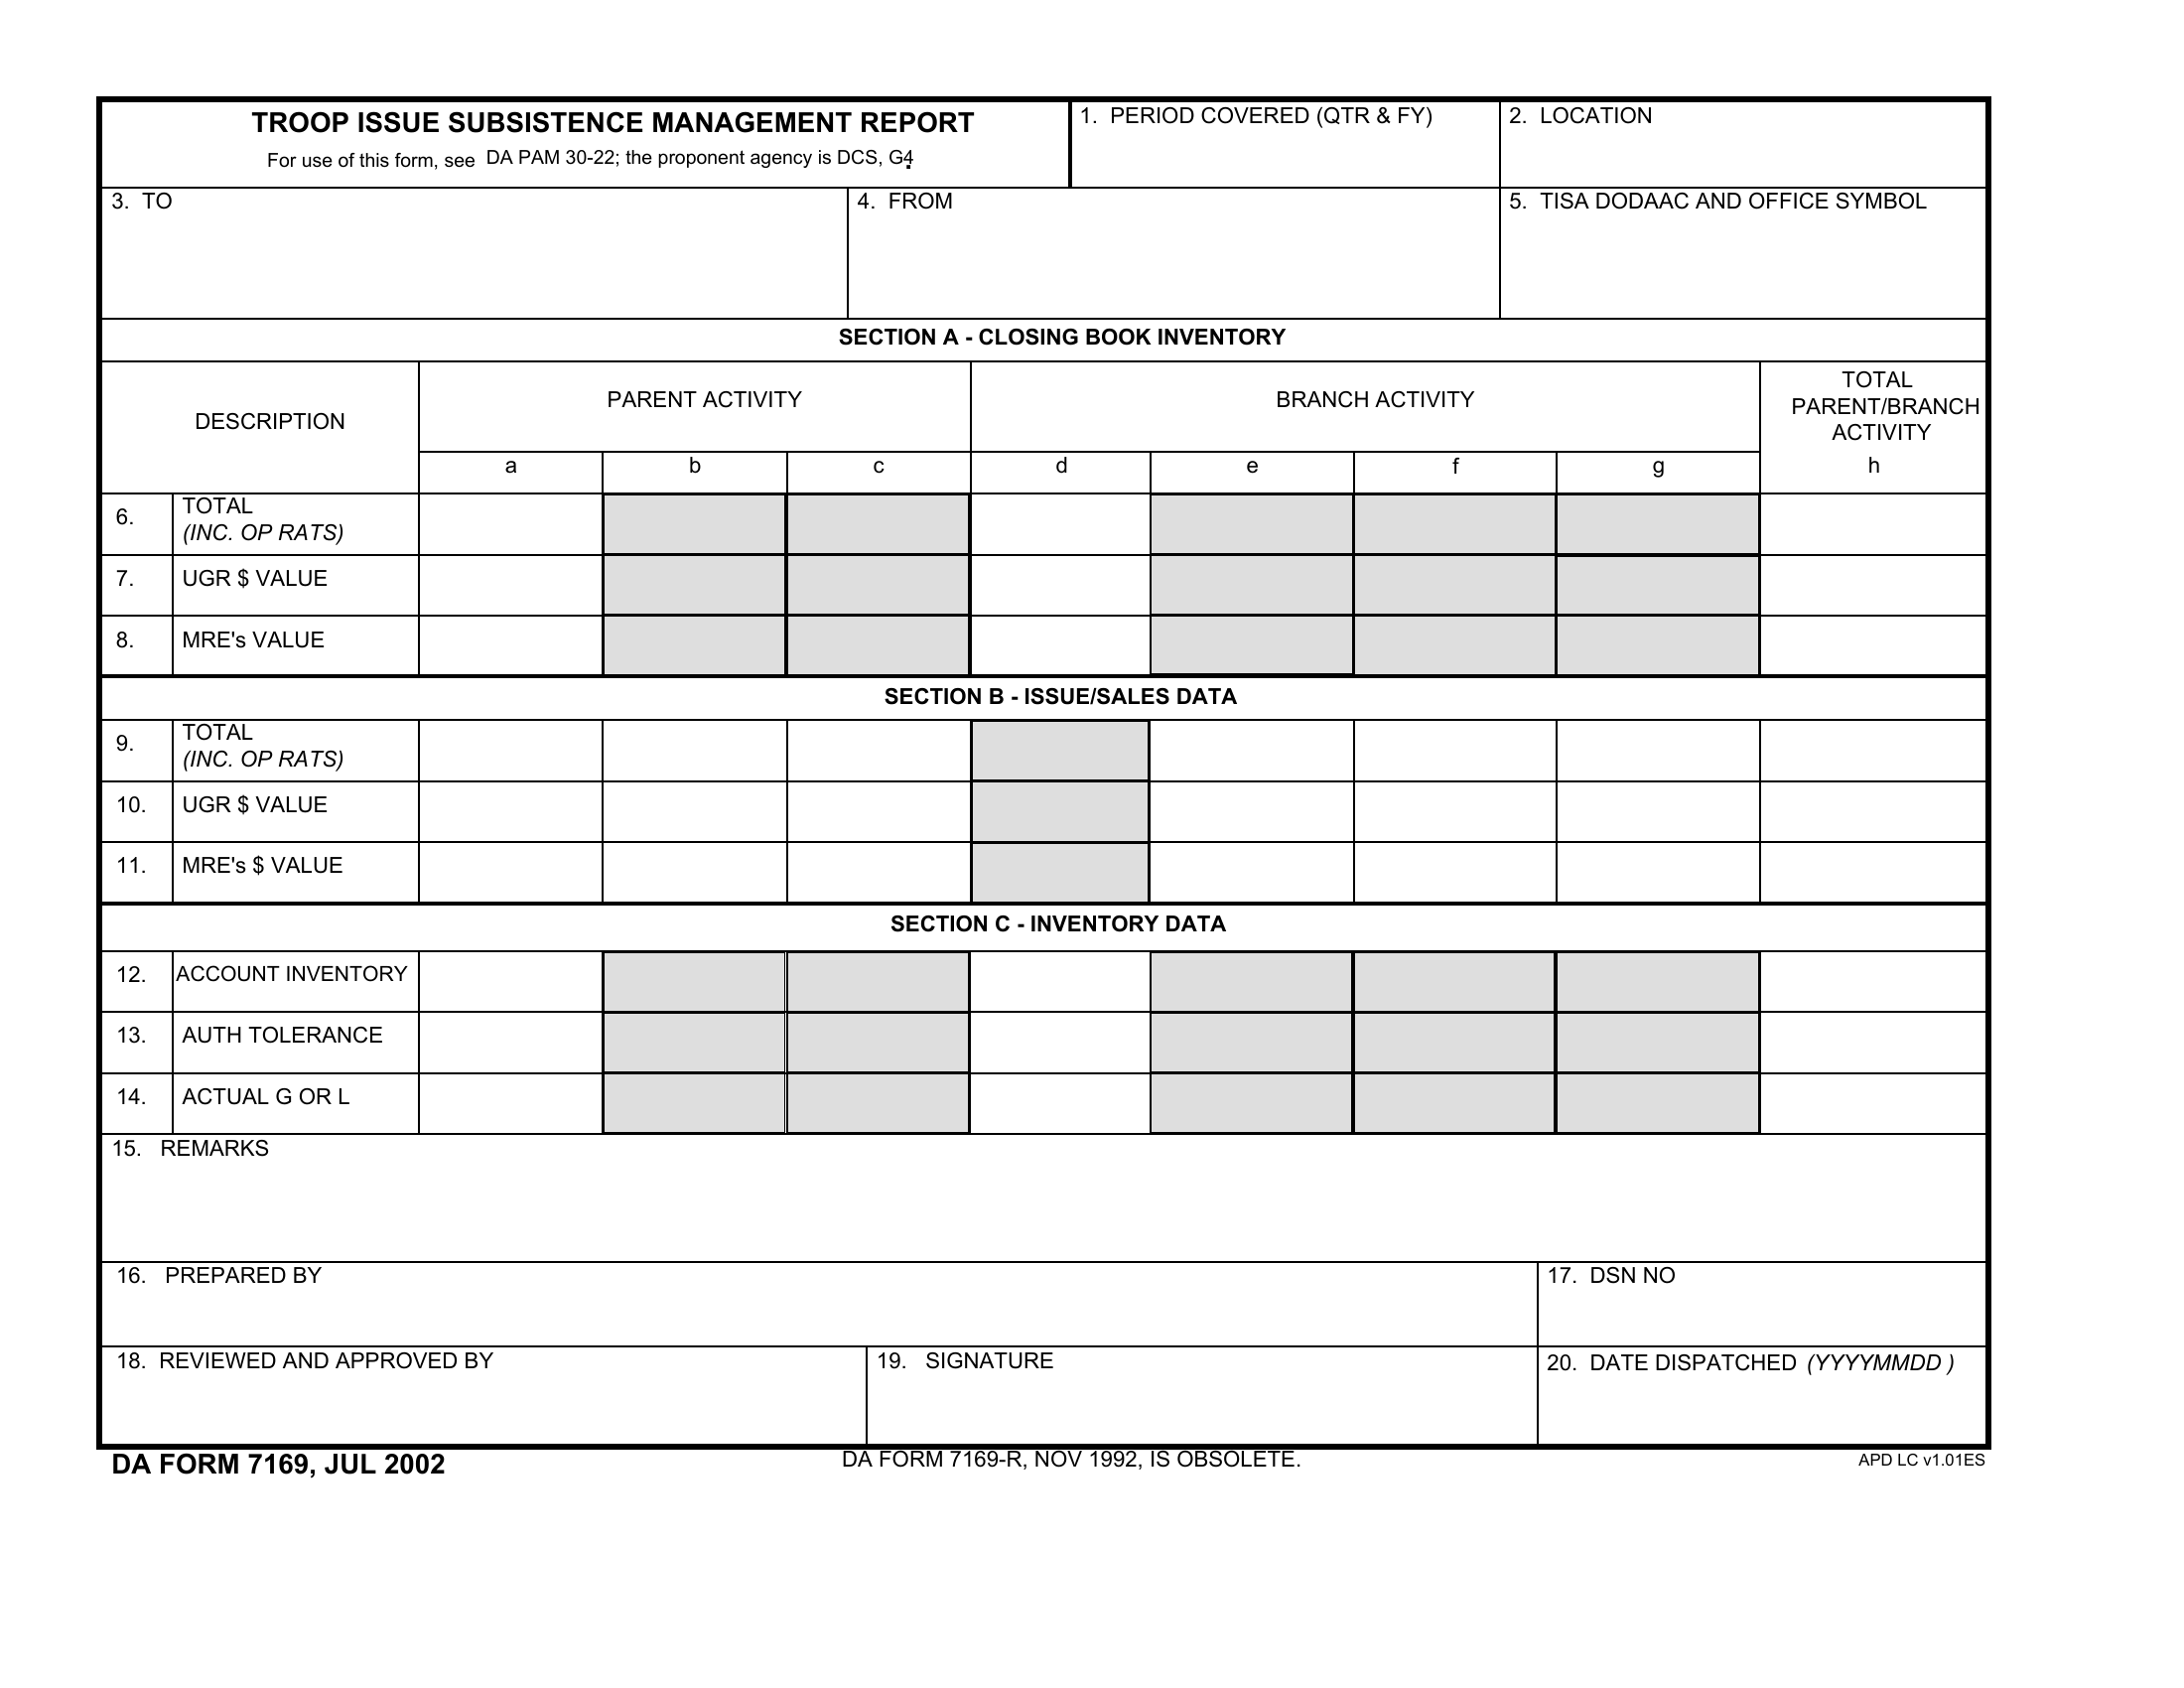 DA Form 7169. Troop Issue Subsistence Management Report | Forms - Docs ...